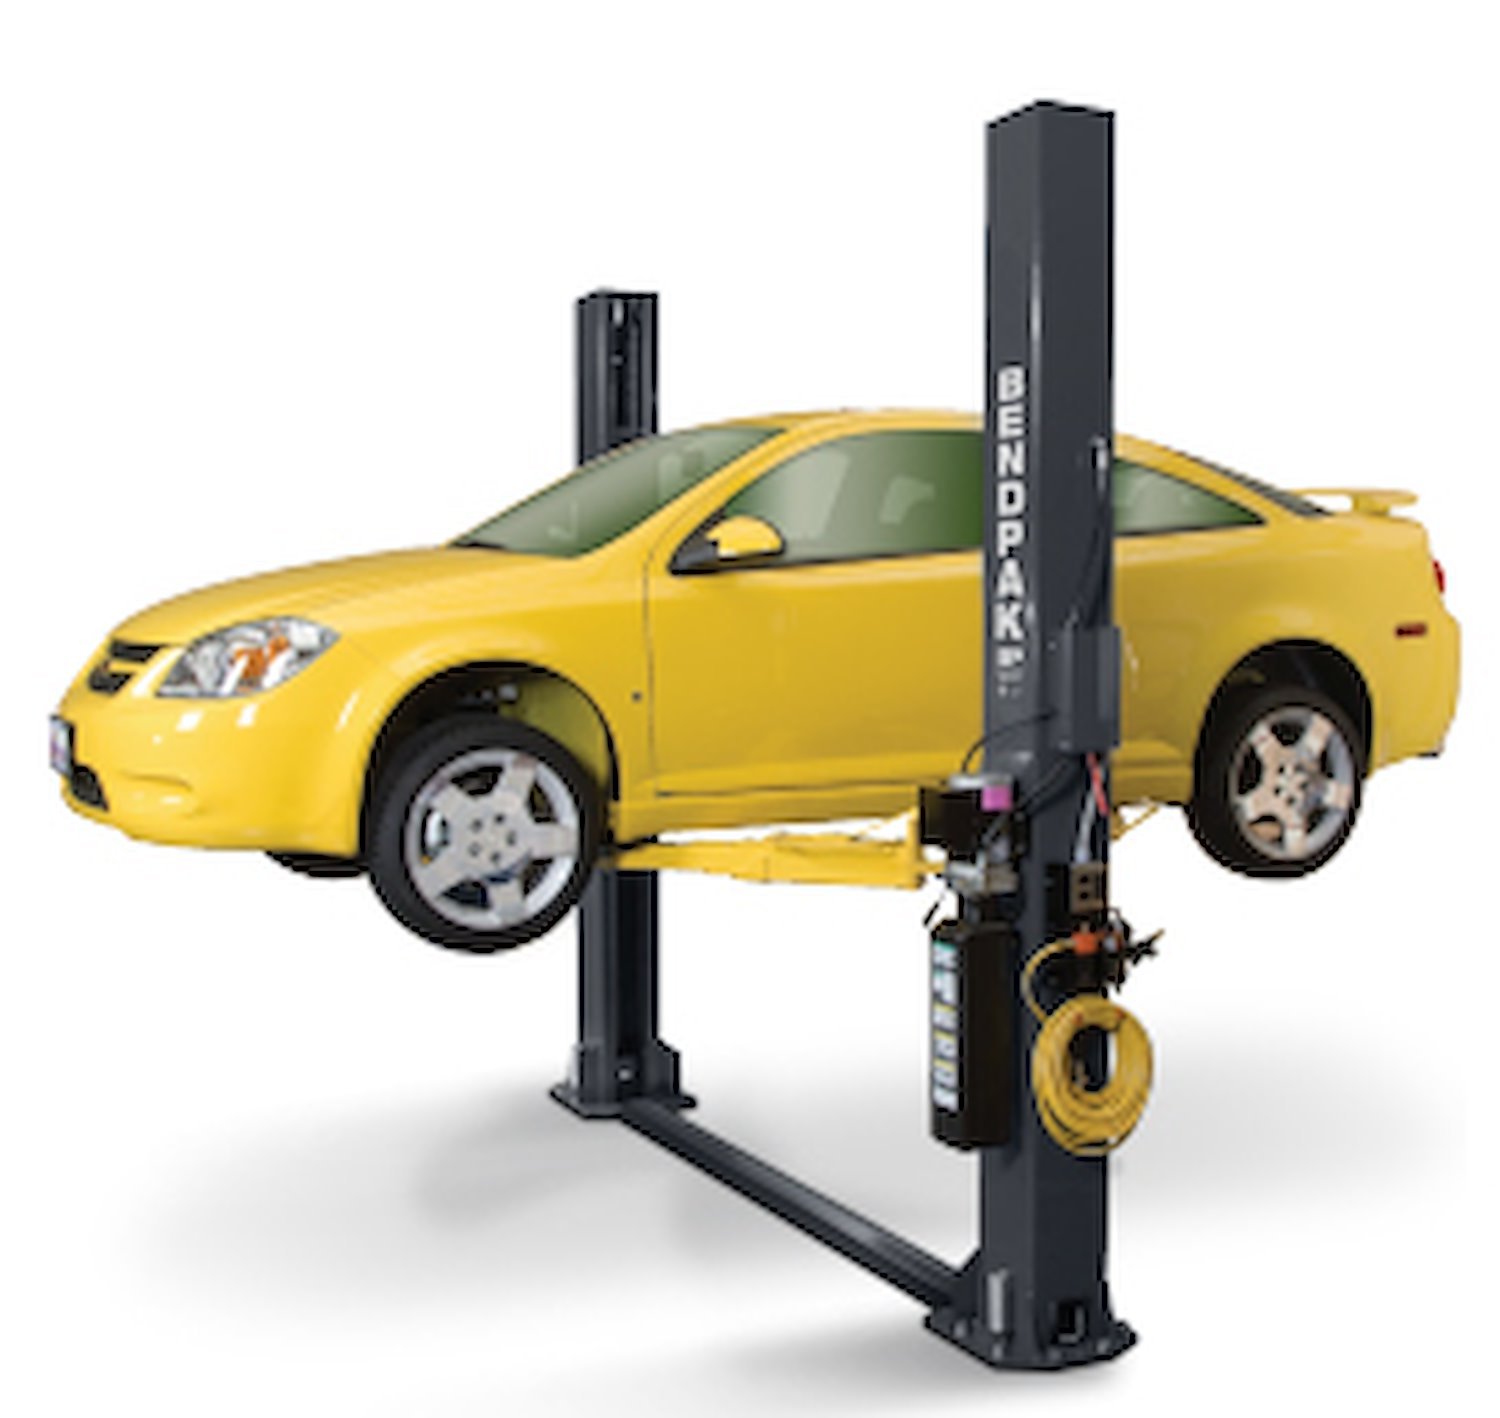 XPR-9S-LP Two-Post Lift, Low-Profile Arms, 9,000-lb. Capacity